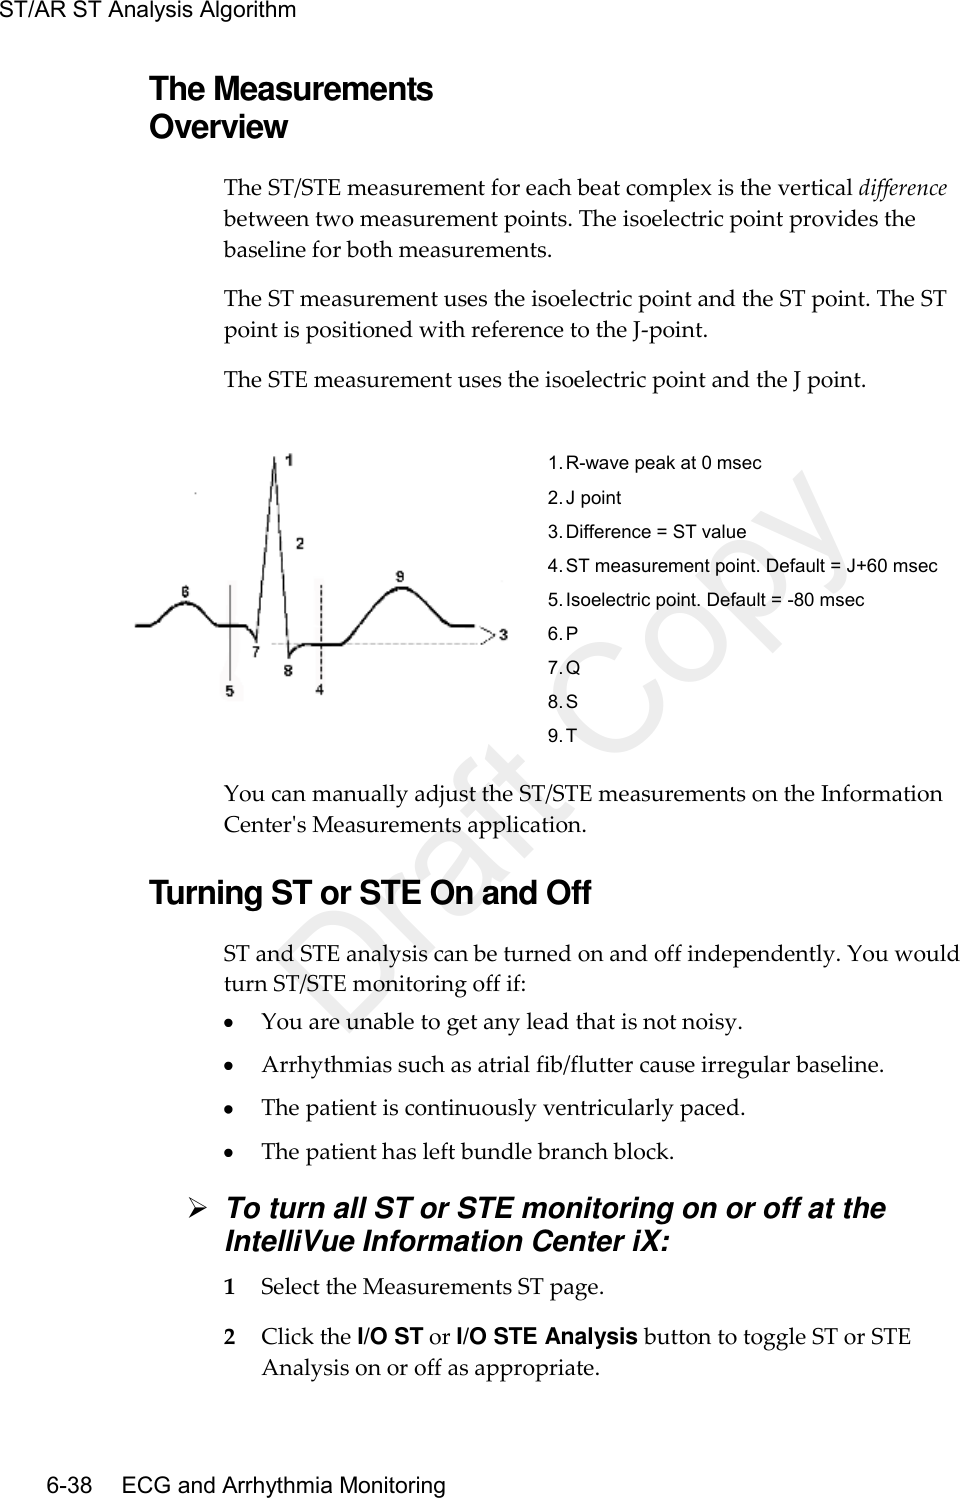 ST/AR ST Analysis Algorithm   6-38    ECG and Arrhythmia Monitoring The Measurements Overview The ST/STE measurement for each beat complex is the vertical difference between two measurement points. The isoelectric point provides the baseline for both measurements.   The ST measurement uses the isoelectric point and the ST point. The ST point is positioned with reference to the J-point.   The STE measurement uses the isoelectric point and the J point.     1. R-wave peak at 0 msec 2. J point 3. Difference = ST value 4. ST measurement point. Default = J+60 msec 5. Isoelectric point. Default = -80 msec 6. P 7. Q 8. S 9. T You can manually adjust the ST/STE measurements on the Information Center&apos;s Measurements application.  Turning ST or STE On and Off ST and STE analysis can be turned on and off independently. You would turn ST/STE monitoring off if:  You are unable to get any lead that is not noisy.  Arrhythmias such as atrial fib/flutter cause irregular baseline.  The patient is continuously ventricularly paced.  The patient has left bundle branch block.  To turn all ST or STE monitoring on or off at the IntelliVue Information Center iX: 1 Select the Measurements ST page. 2 Click the I/O ST or I/O STE Analysis button to toggle ST or STE Analysis on or off as appropriate. Draft Copy